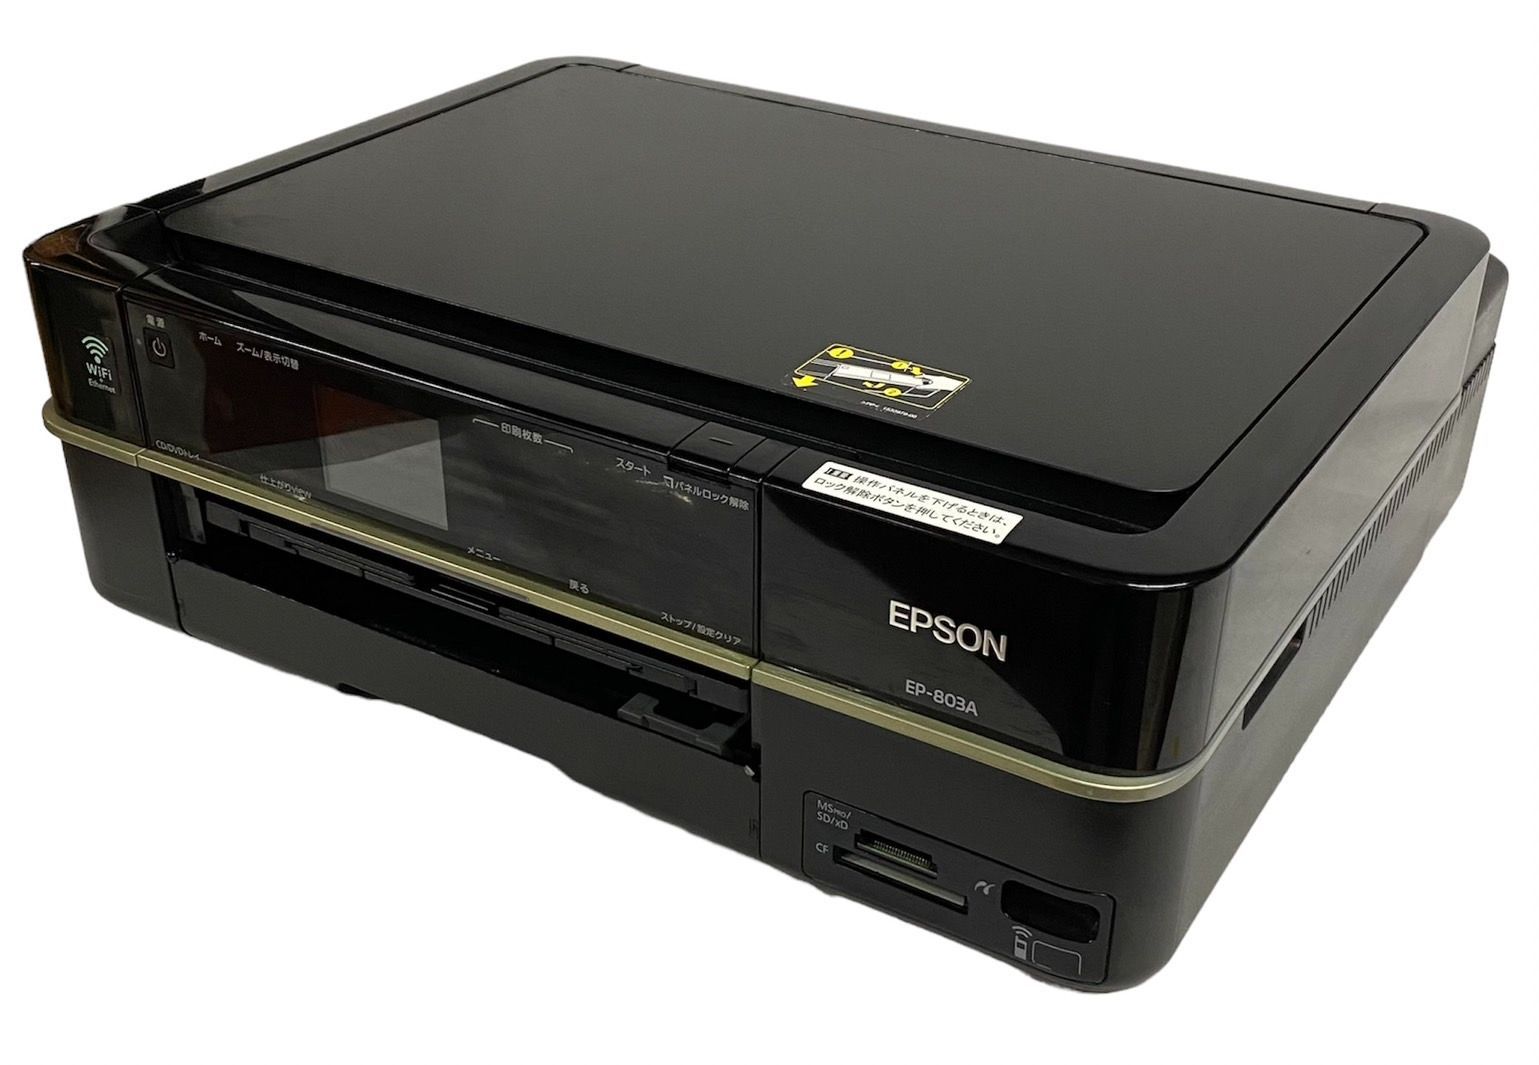 EPSON EP-805AW EP-803A エプソン プリンター - PC周辺機器